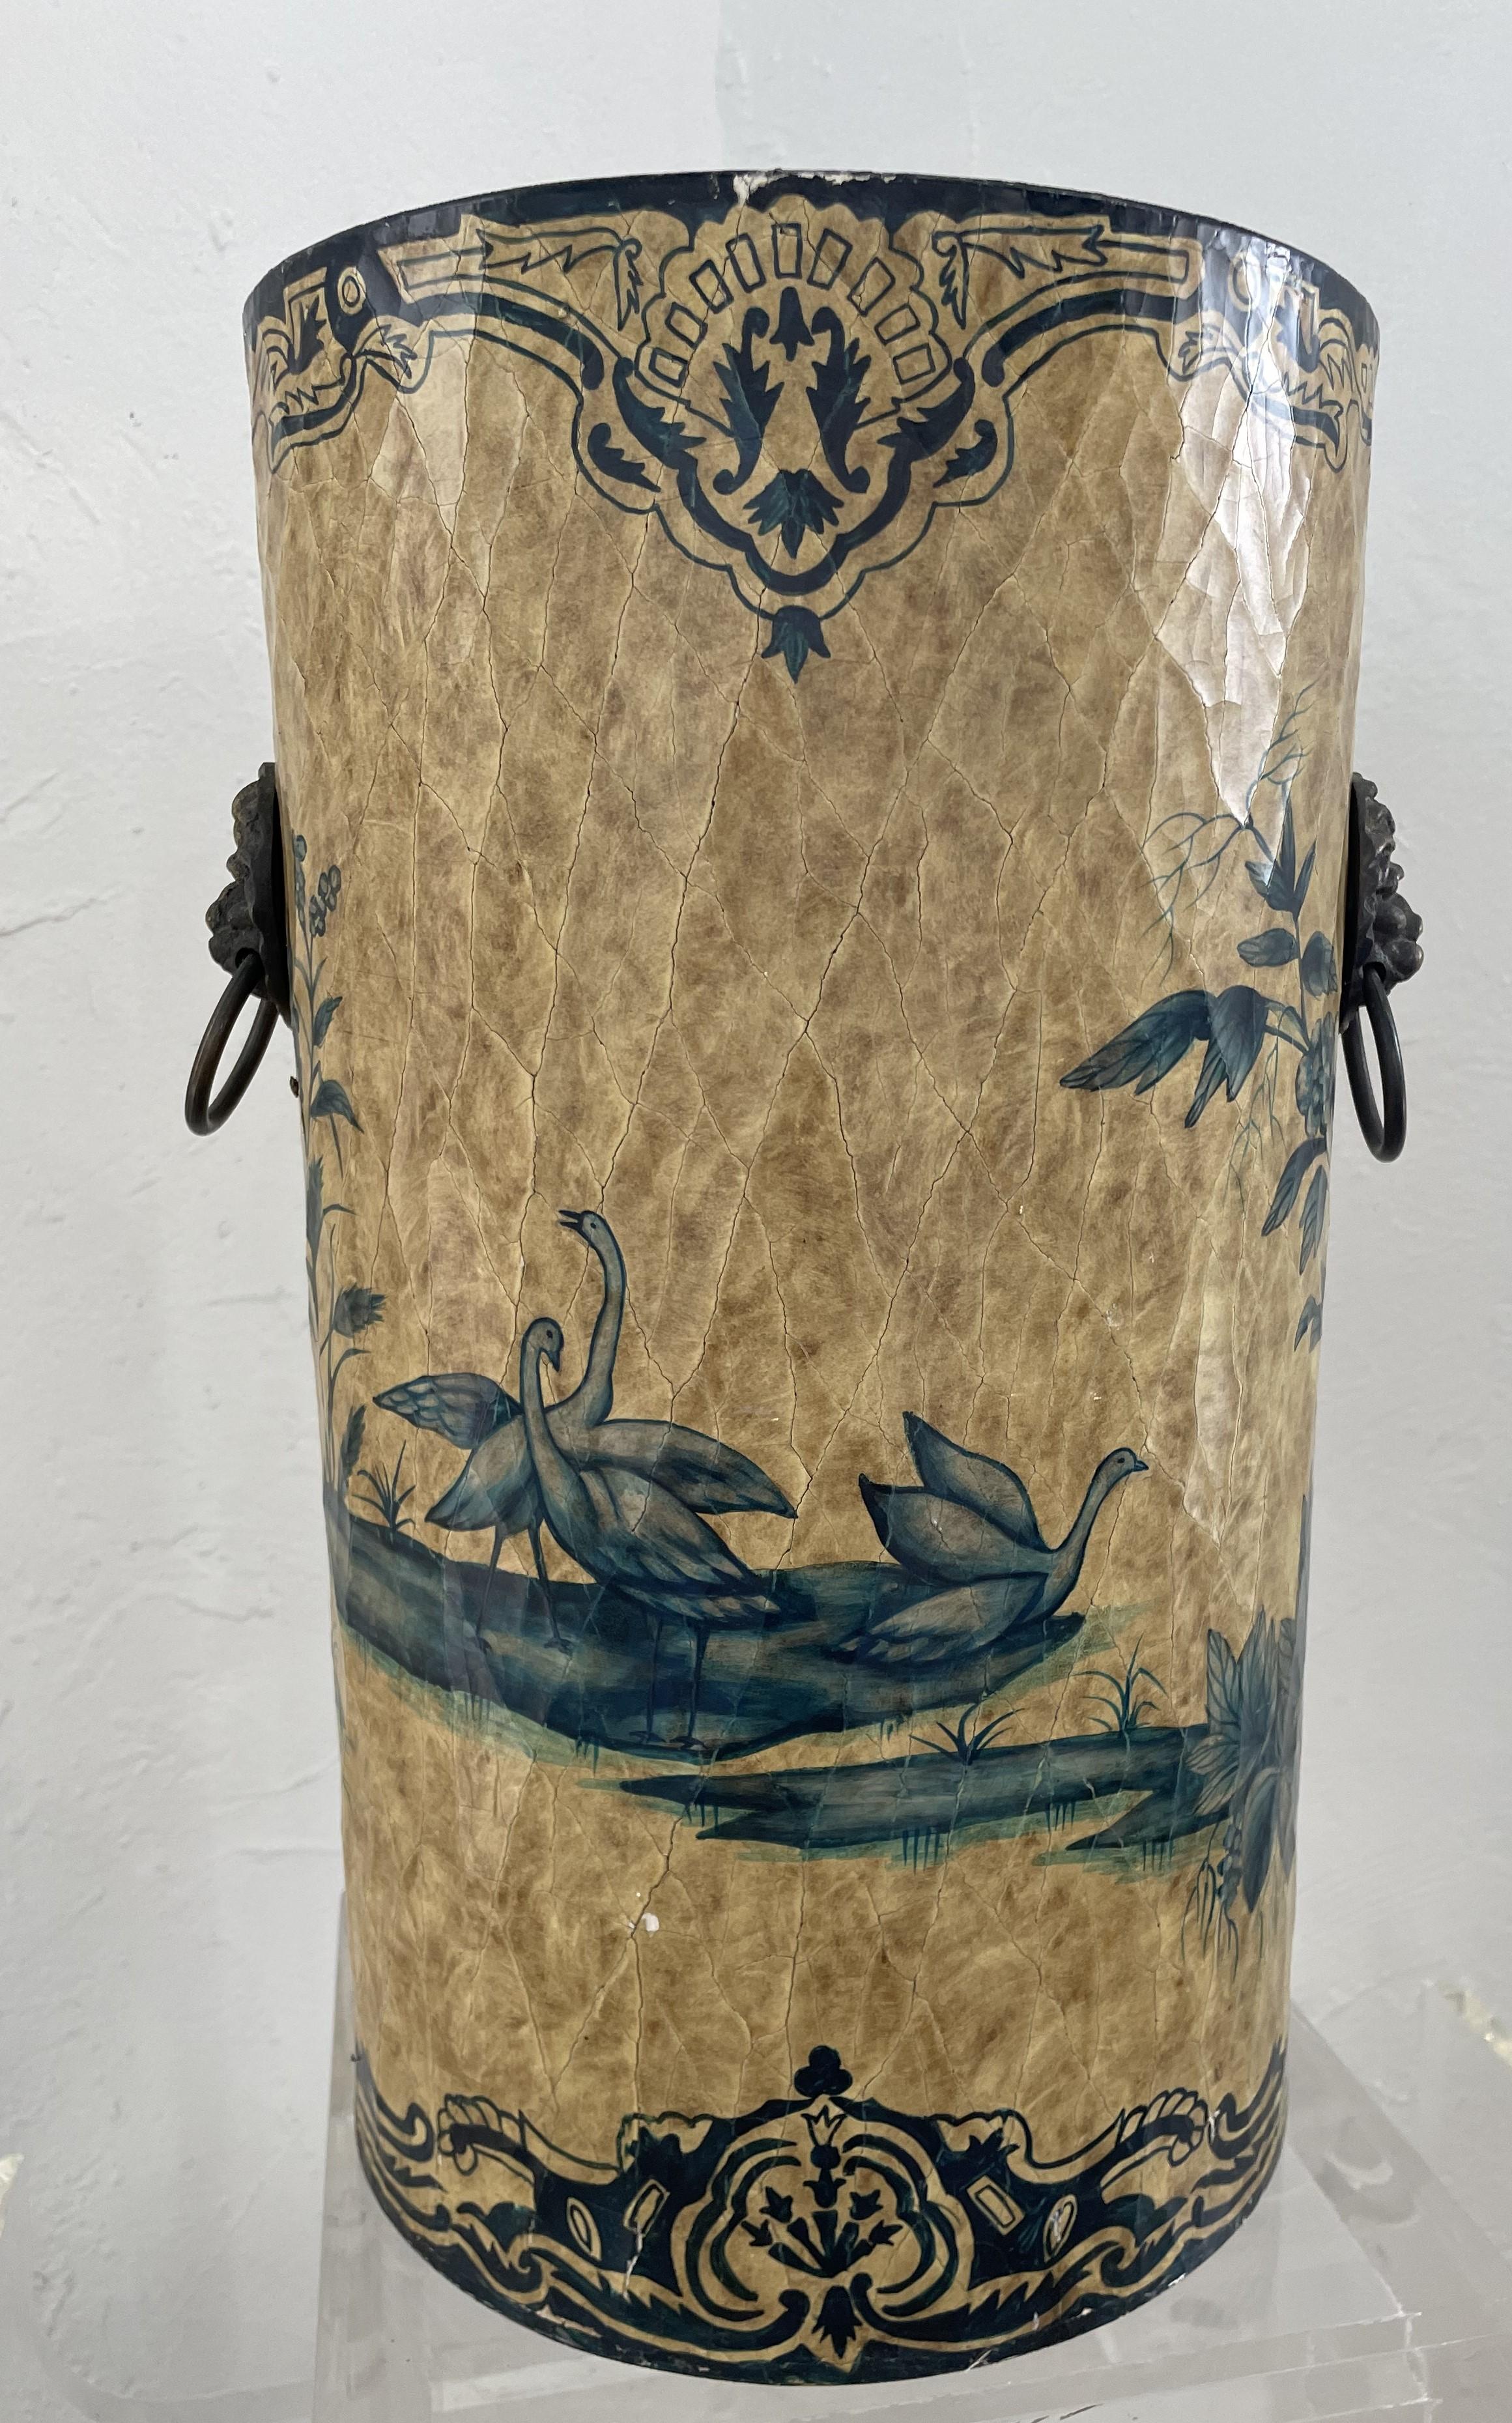 This sturdy and elegant English-chinoiserie umbrella stand gets its sturdiness from its metal core and its elegances from the hand painted chinoiserie nature scene on papier mâché in gold and green. A combination that provides a utilitarian